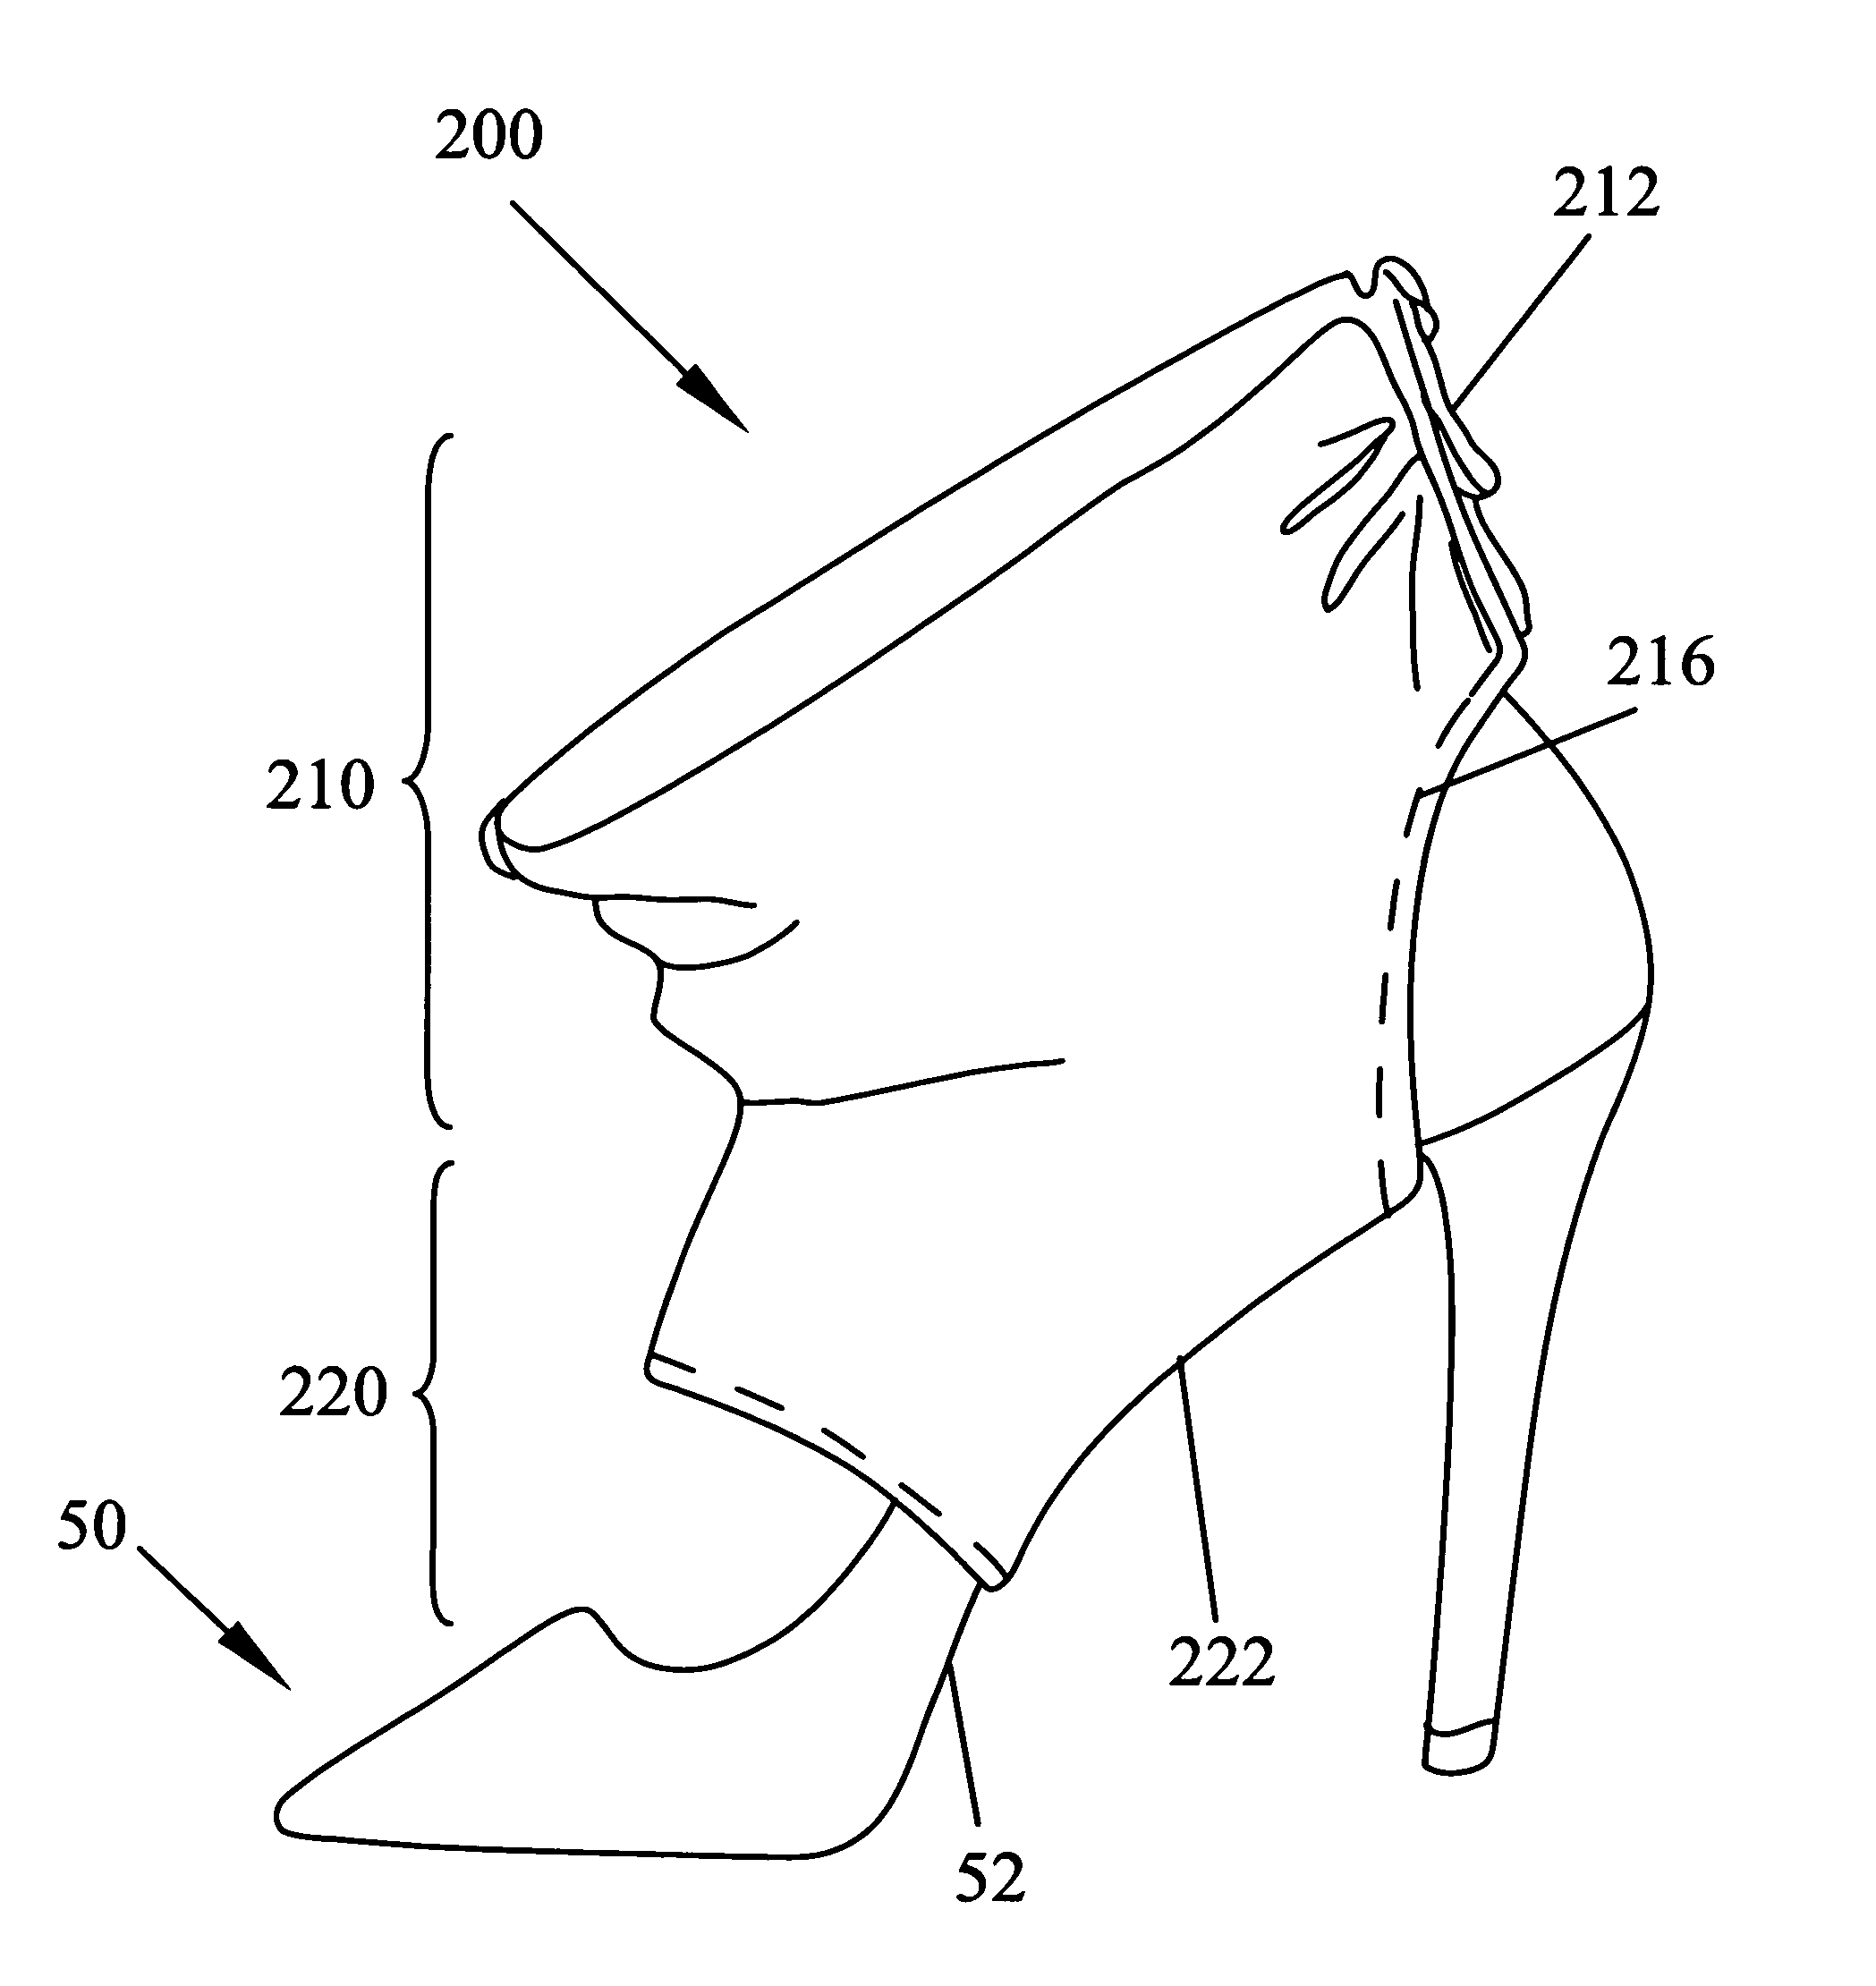 Leg cover applied to a shoe or a foot providing warmth, protection, ankle support, and fashion style